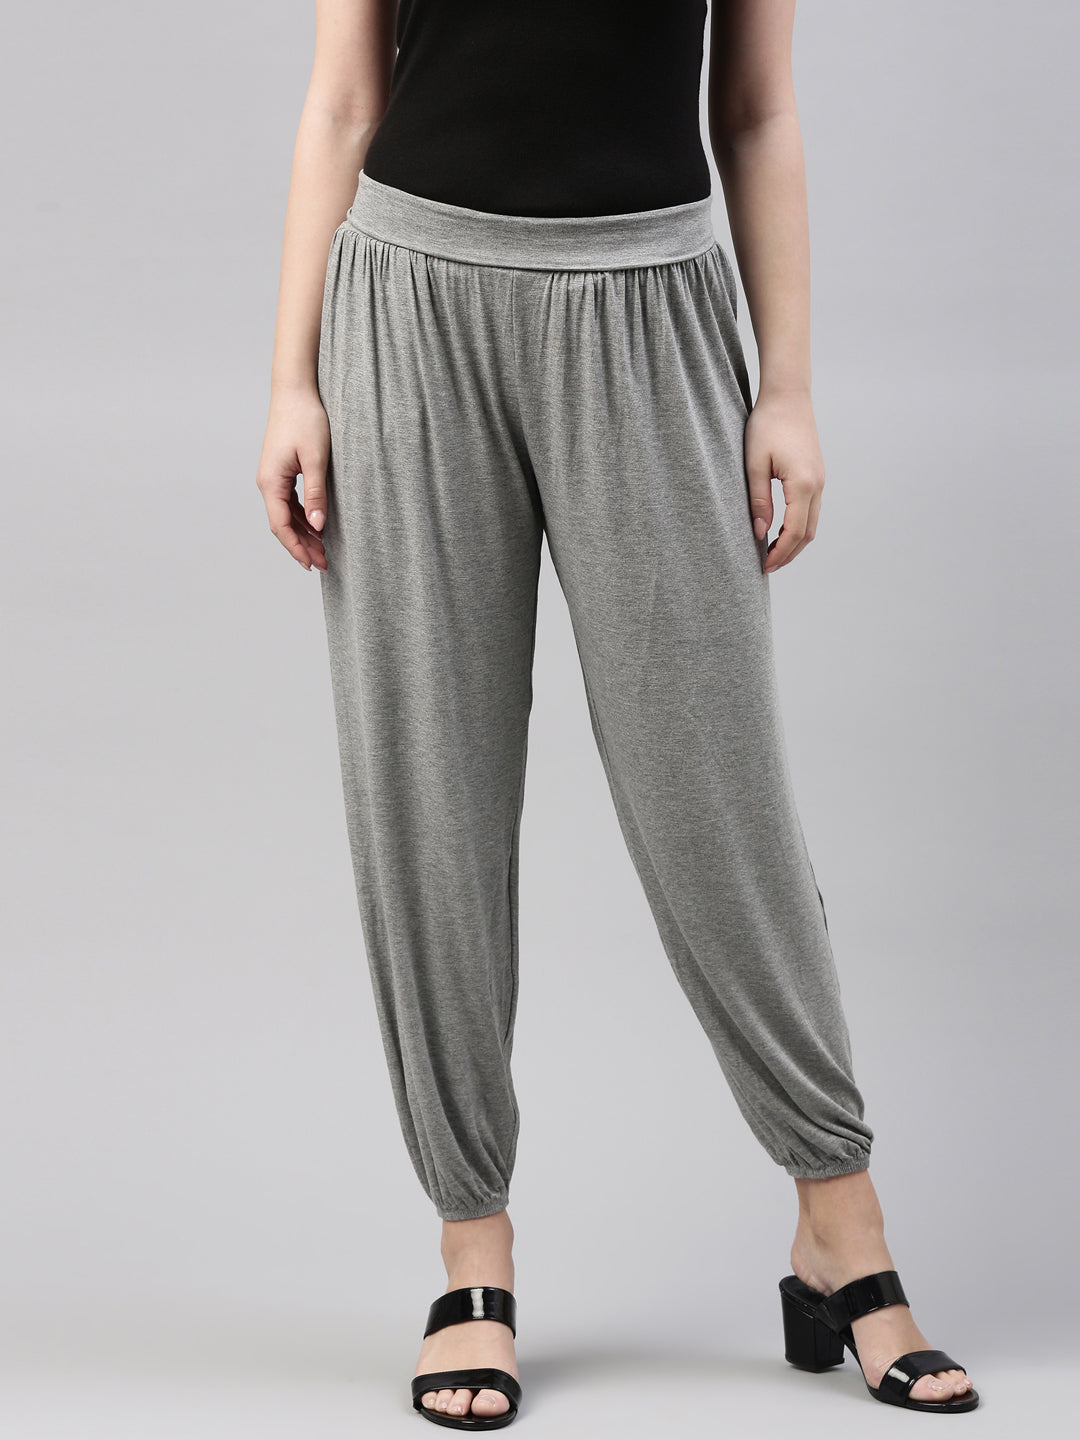 Buy Online Black Viscose Polyester Jogger Pants for Women  Girls at Best  Prices in Biba IndiaATHLE